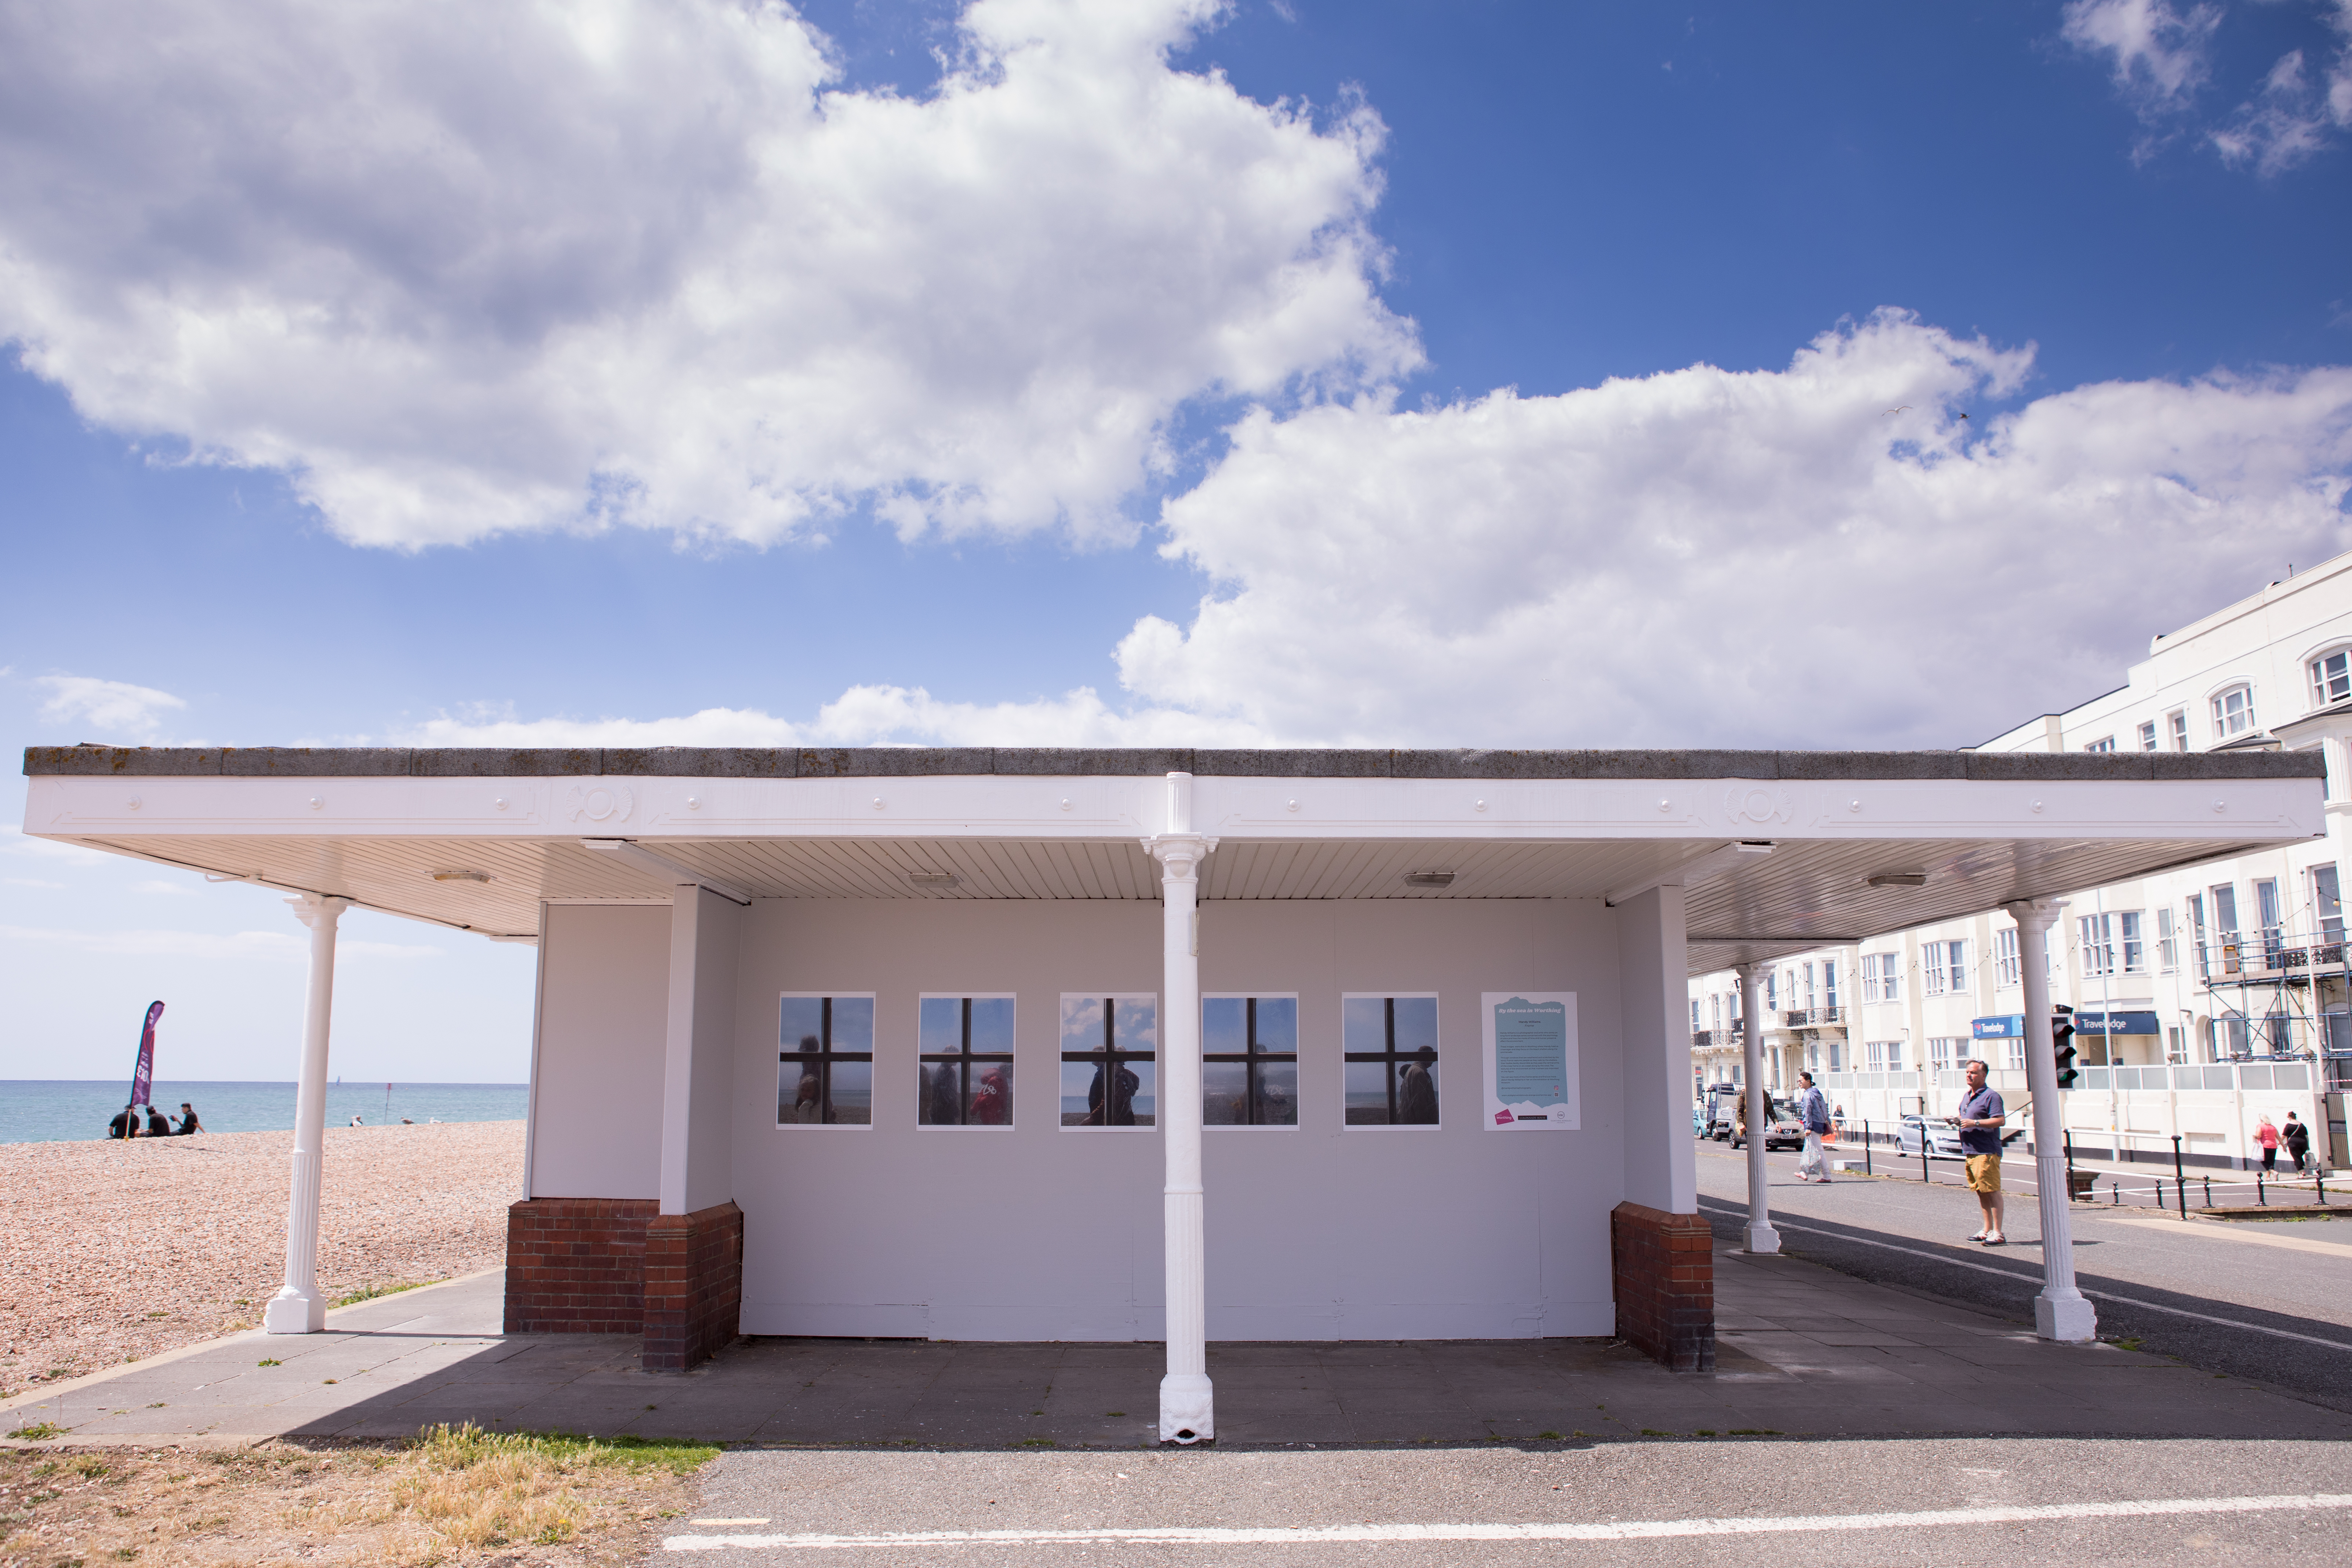 Seafront Shelter Exhibition